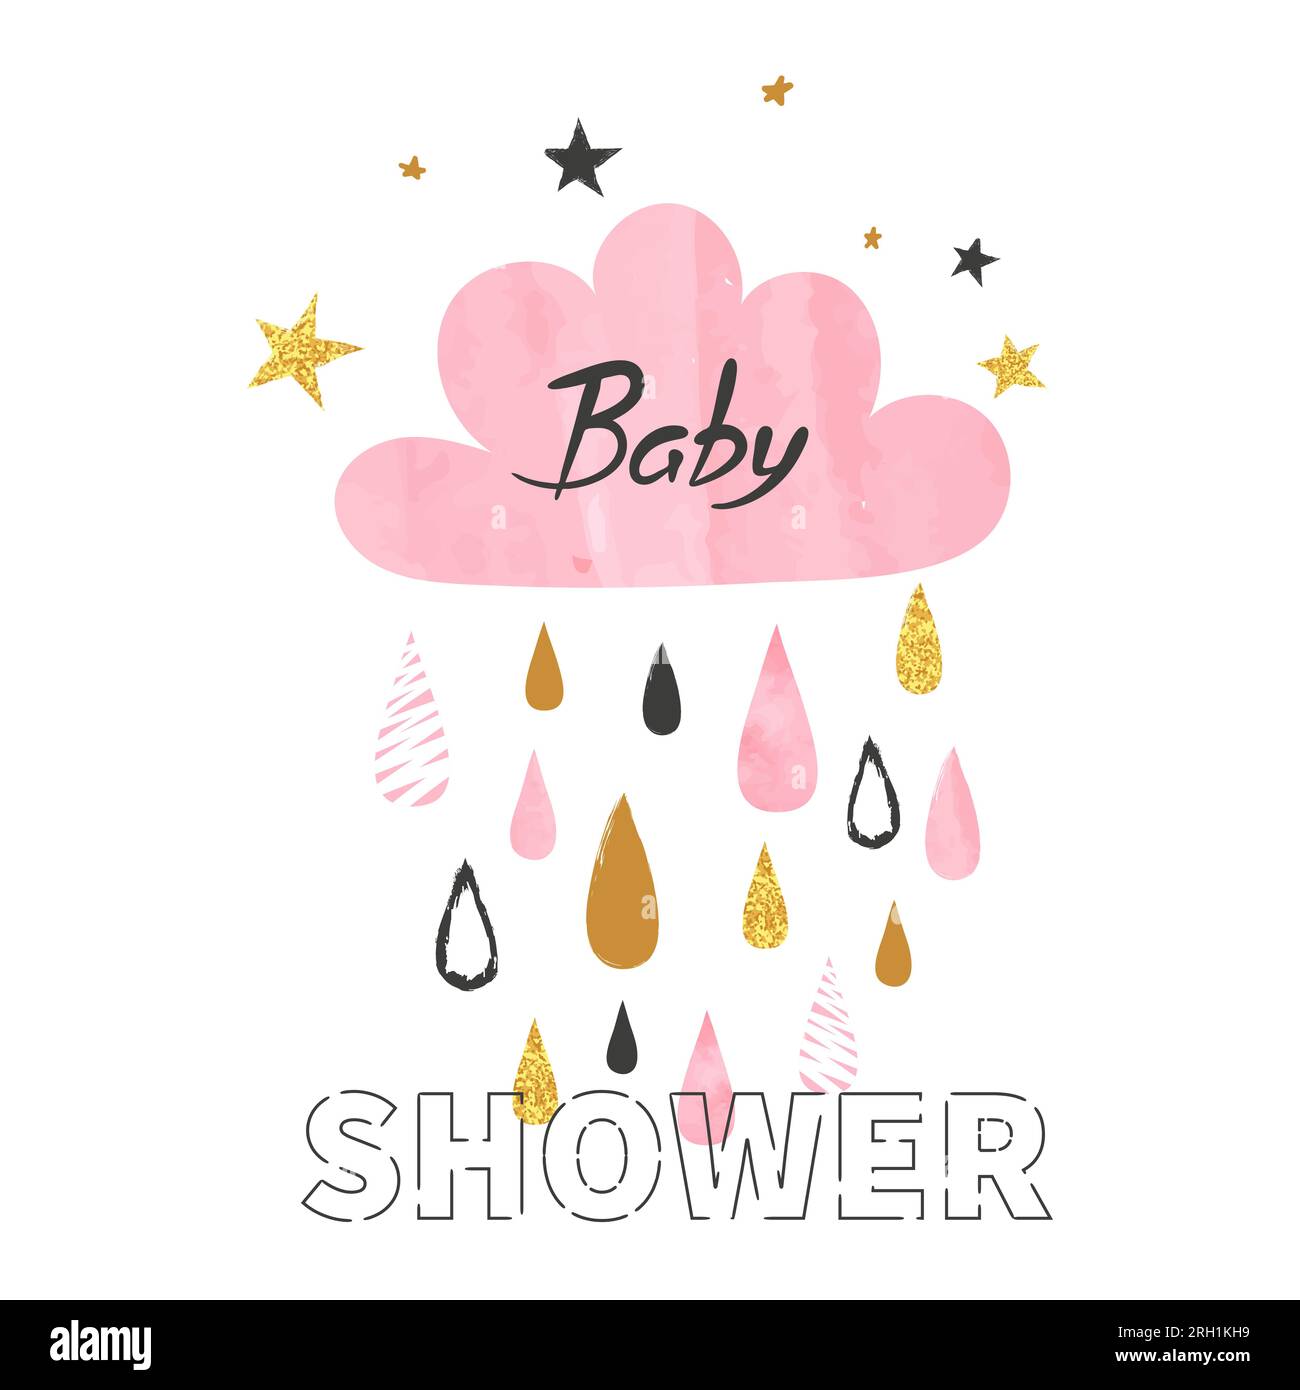 Baby shower girl vector illustration with rainy cloud. Stock Vector